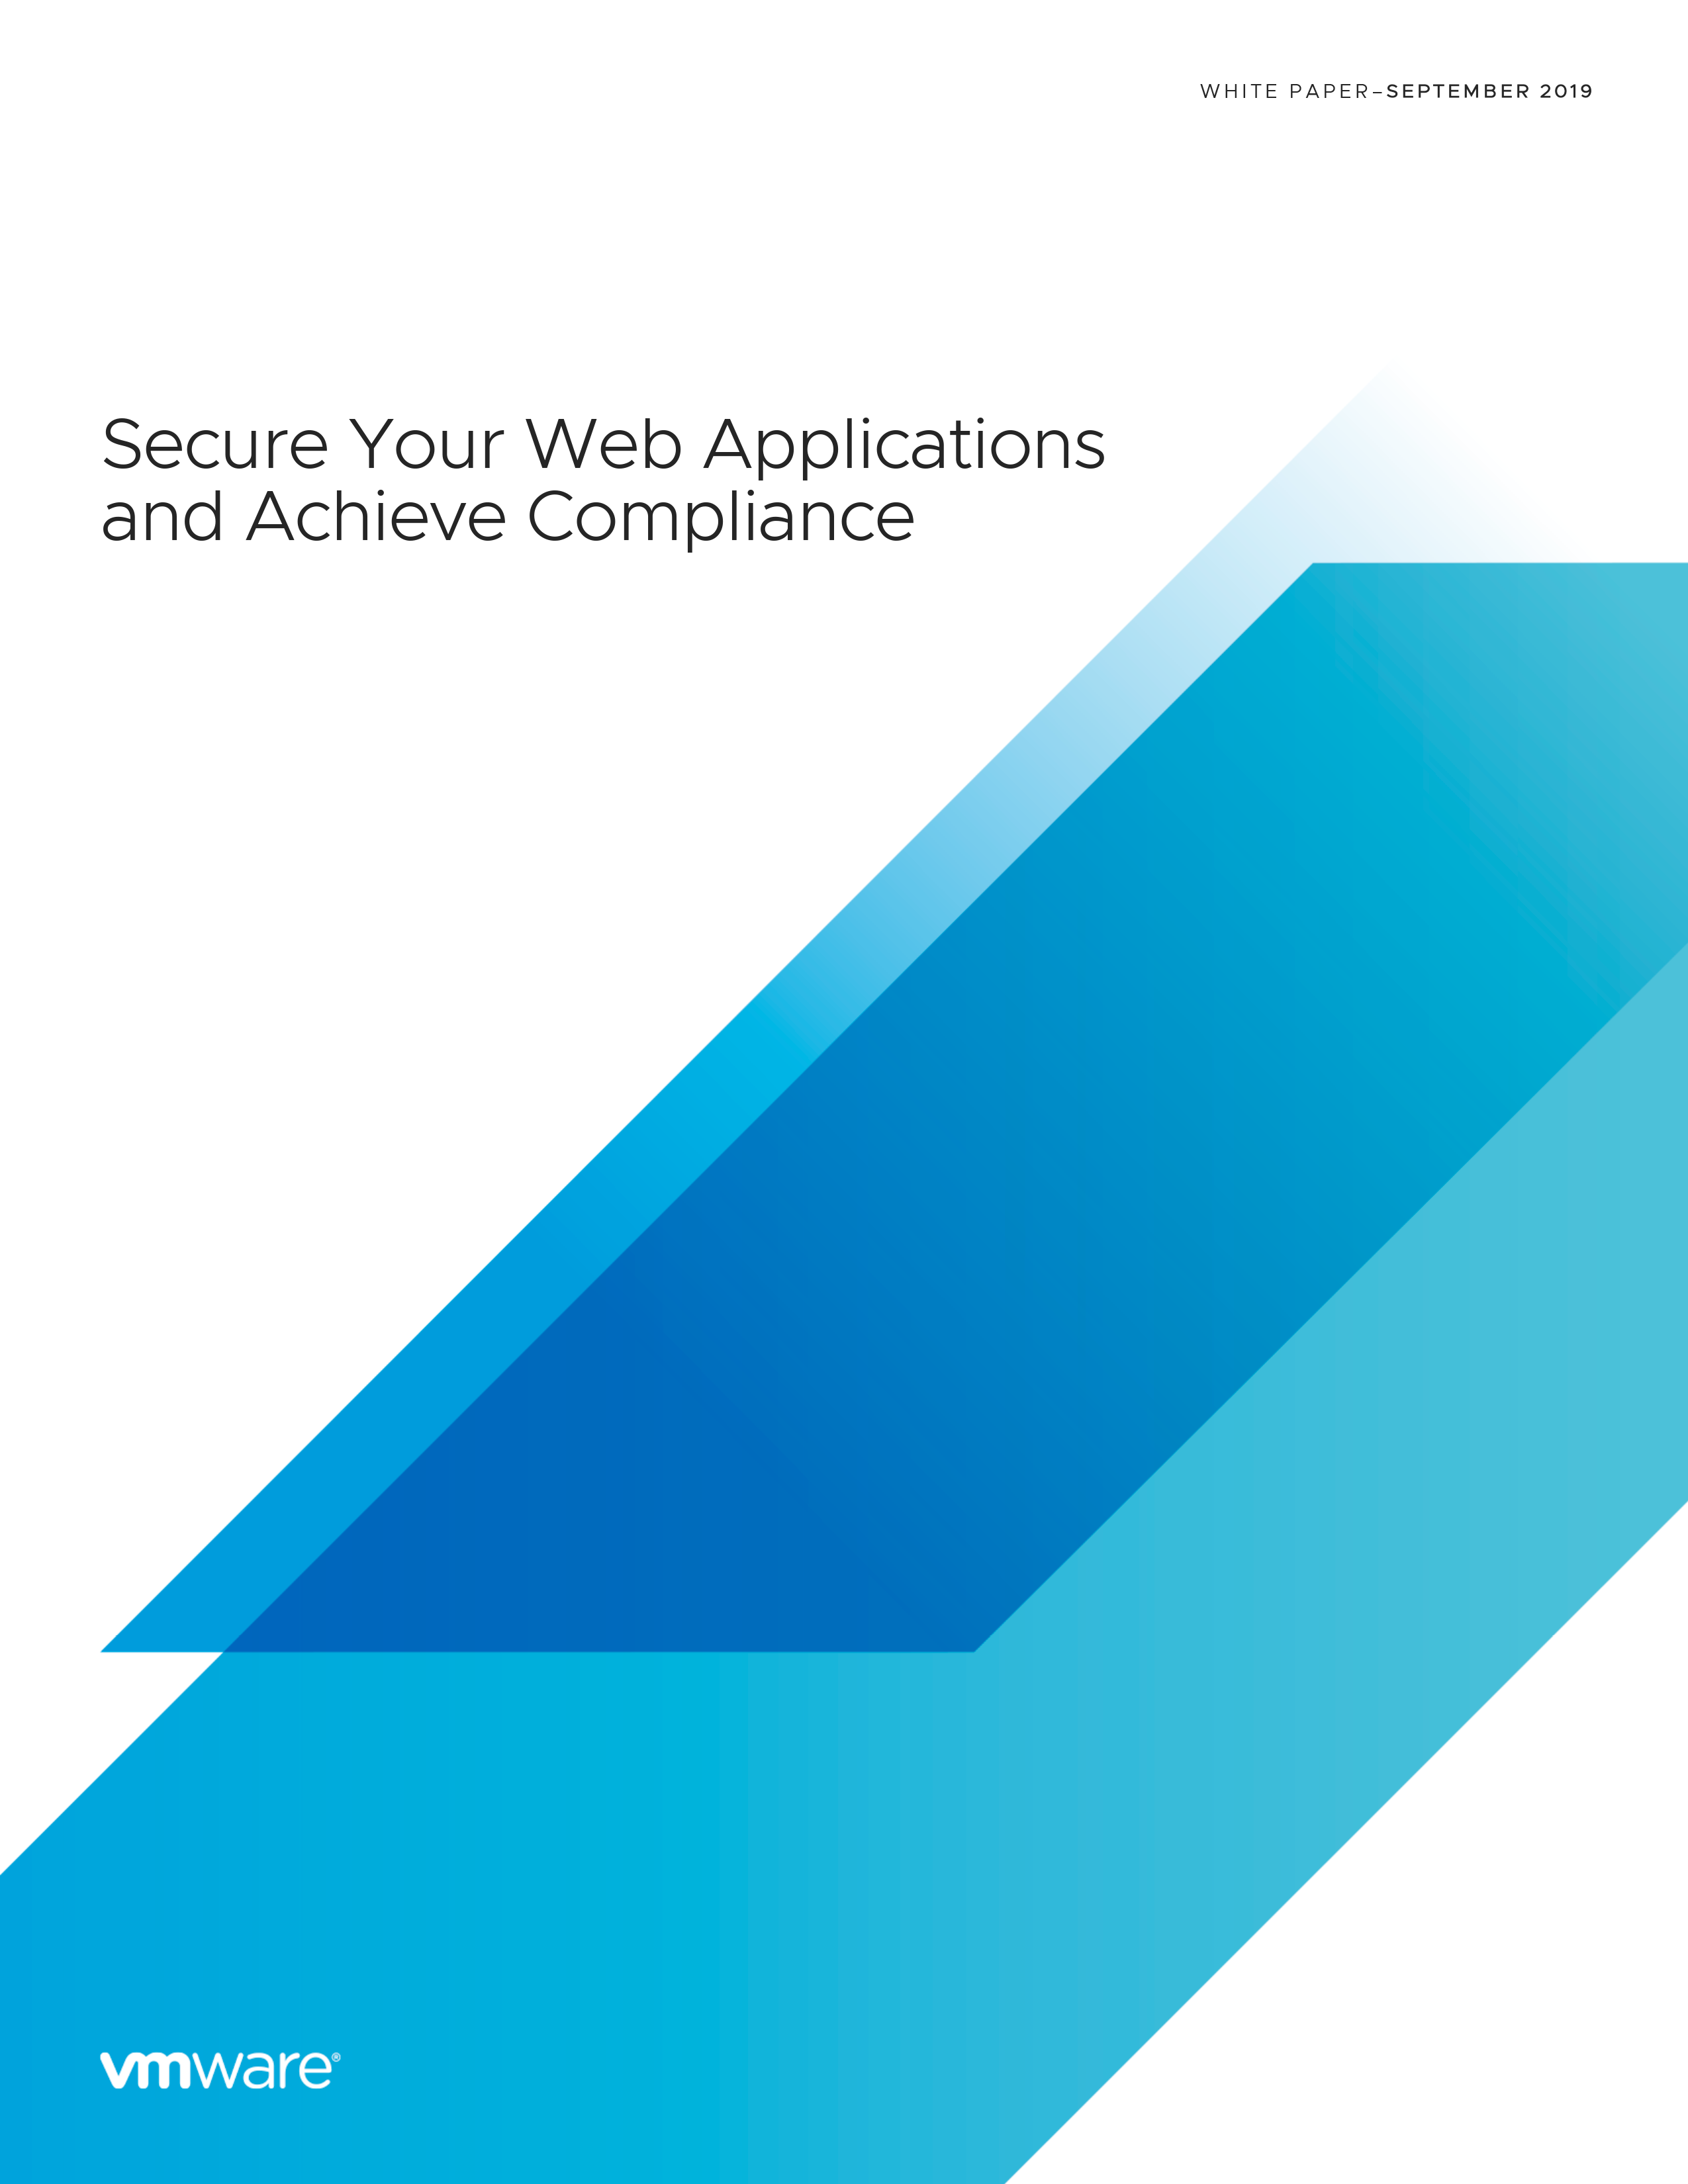 flat-achieving-app-security-and-compliance-white-paper